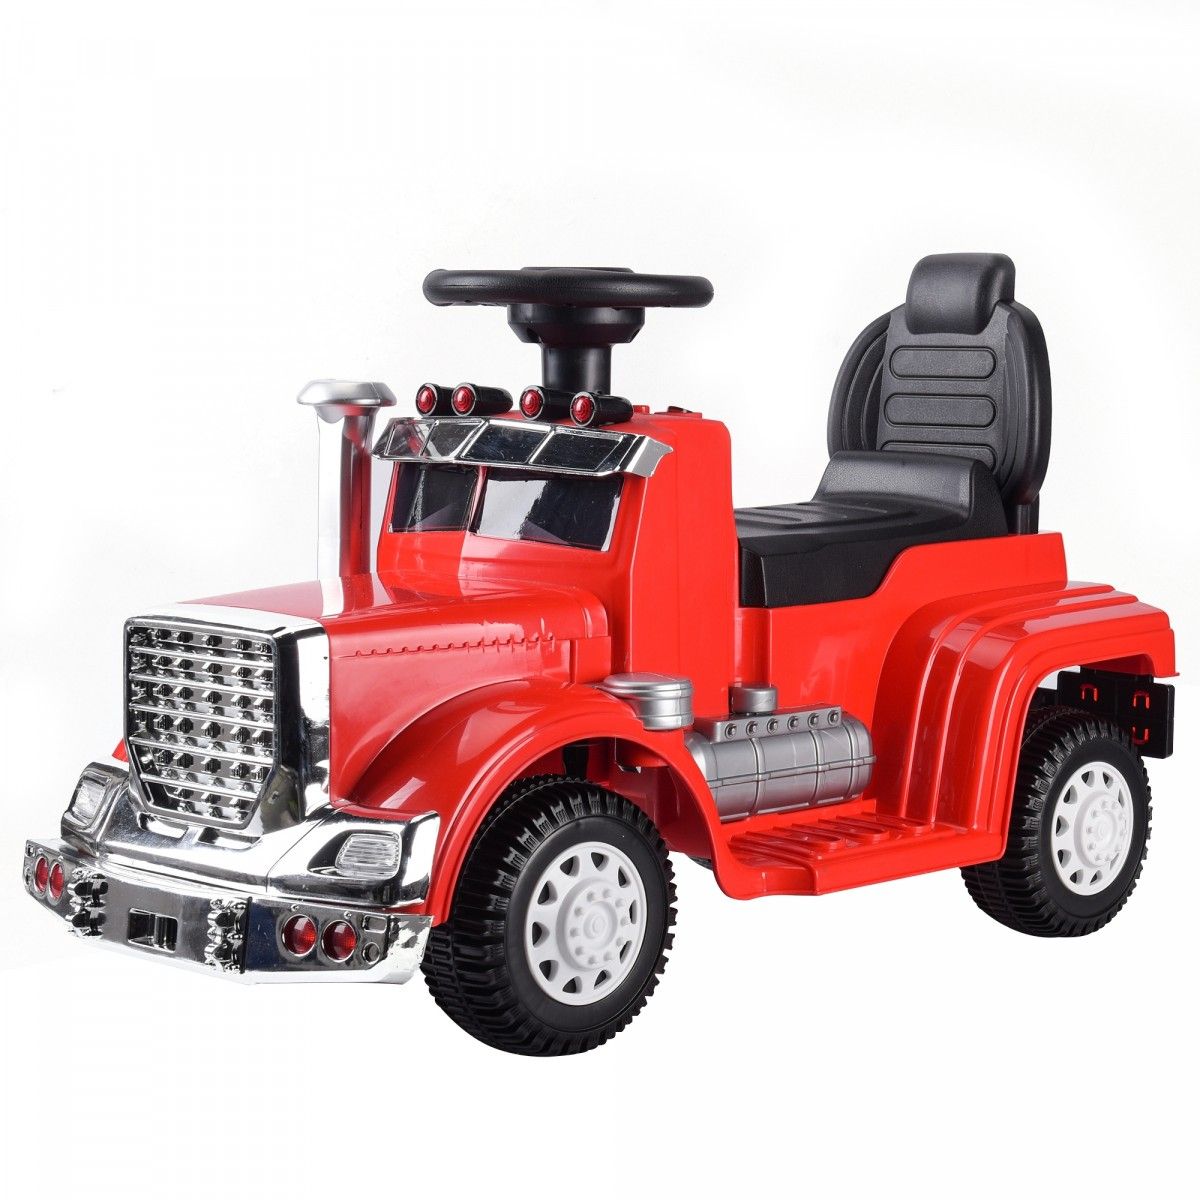 Jeronimo Lorry Truck Ride on - Red | Buy Online in South Africa ...